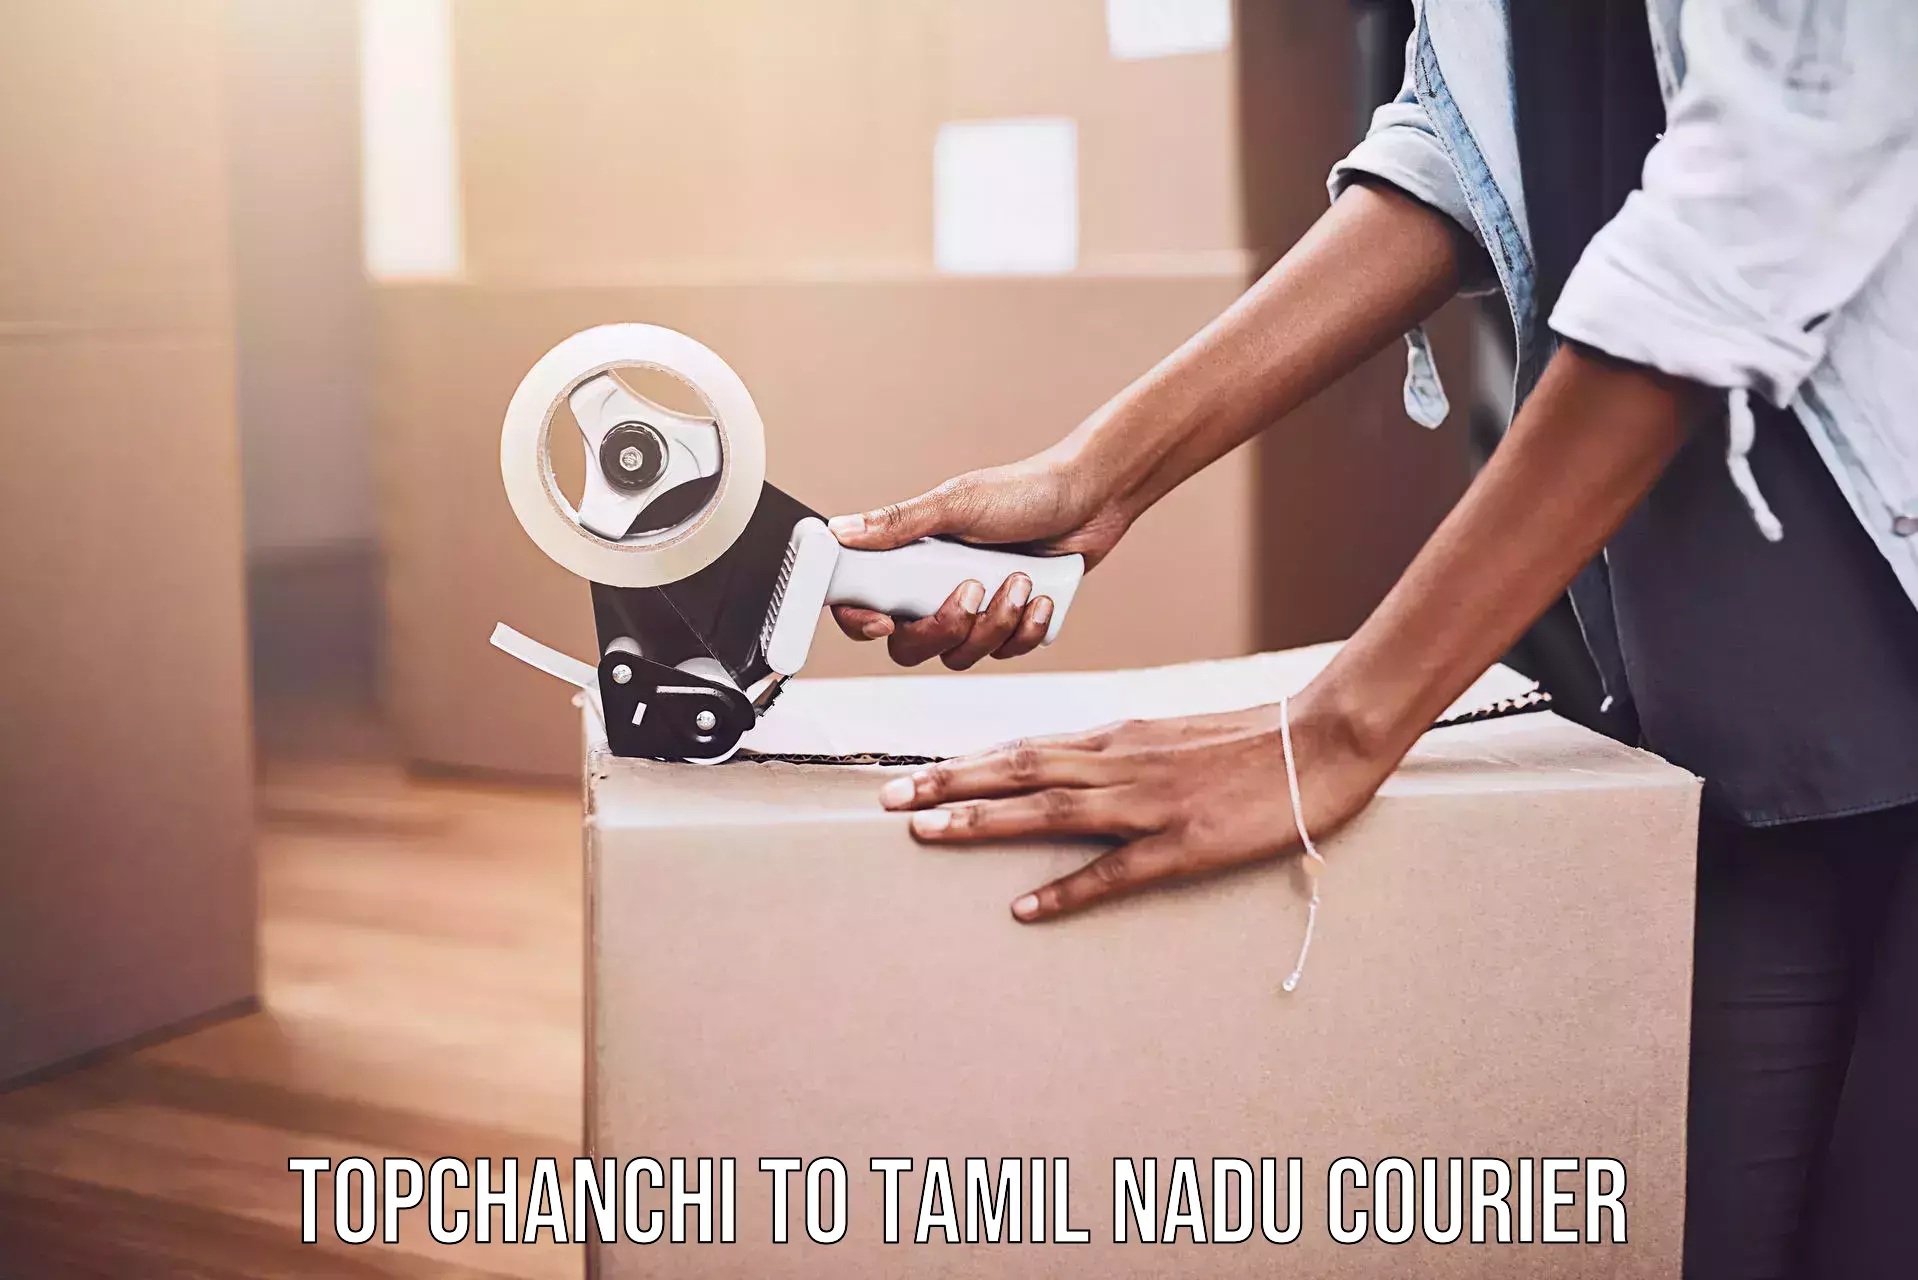 Cash on delivery service Topchanchi to Surandai